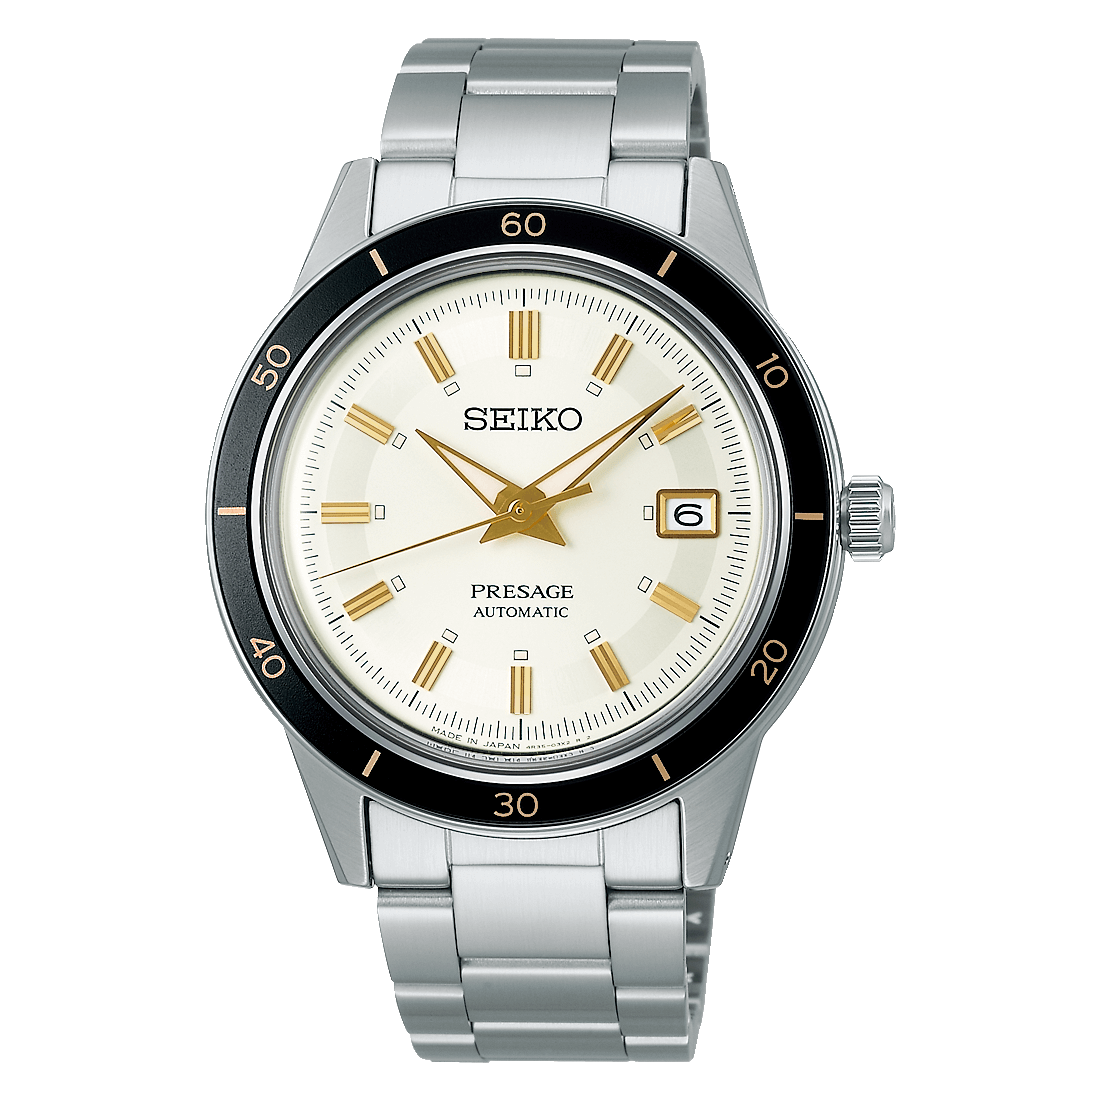 Seiko Presage Automatic Men's Watch SRPG03 - Obsessions Jewellery